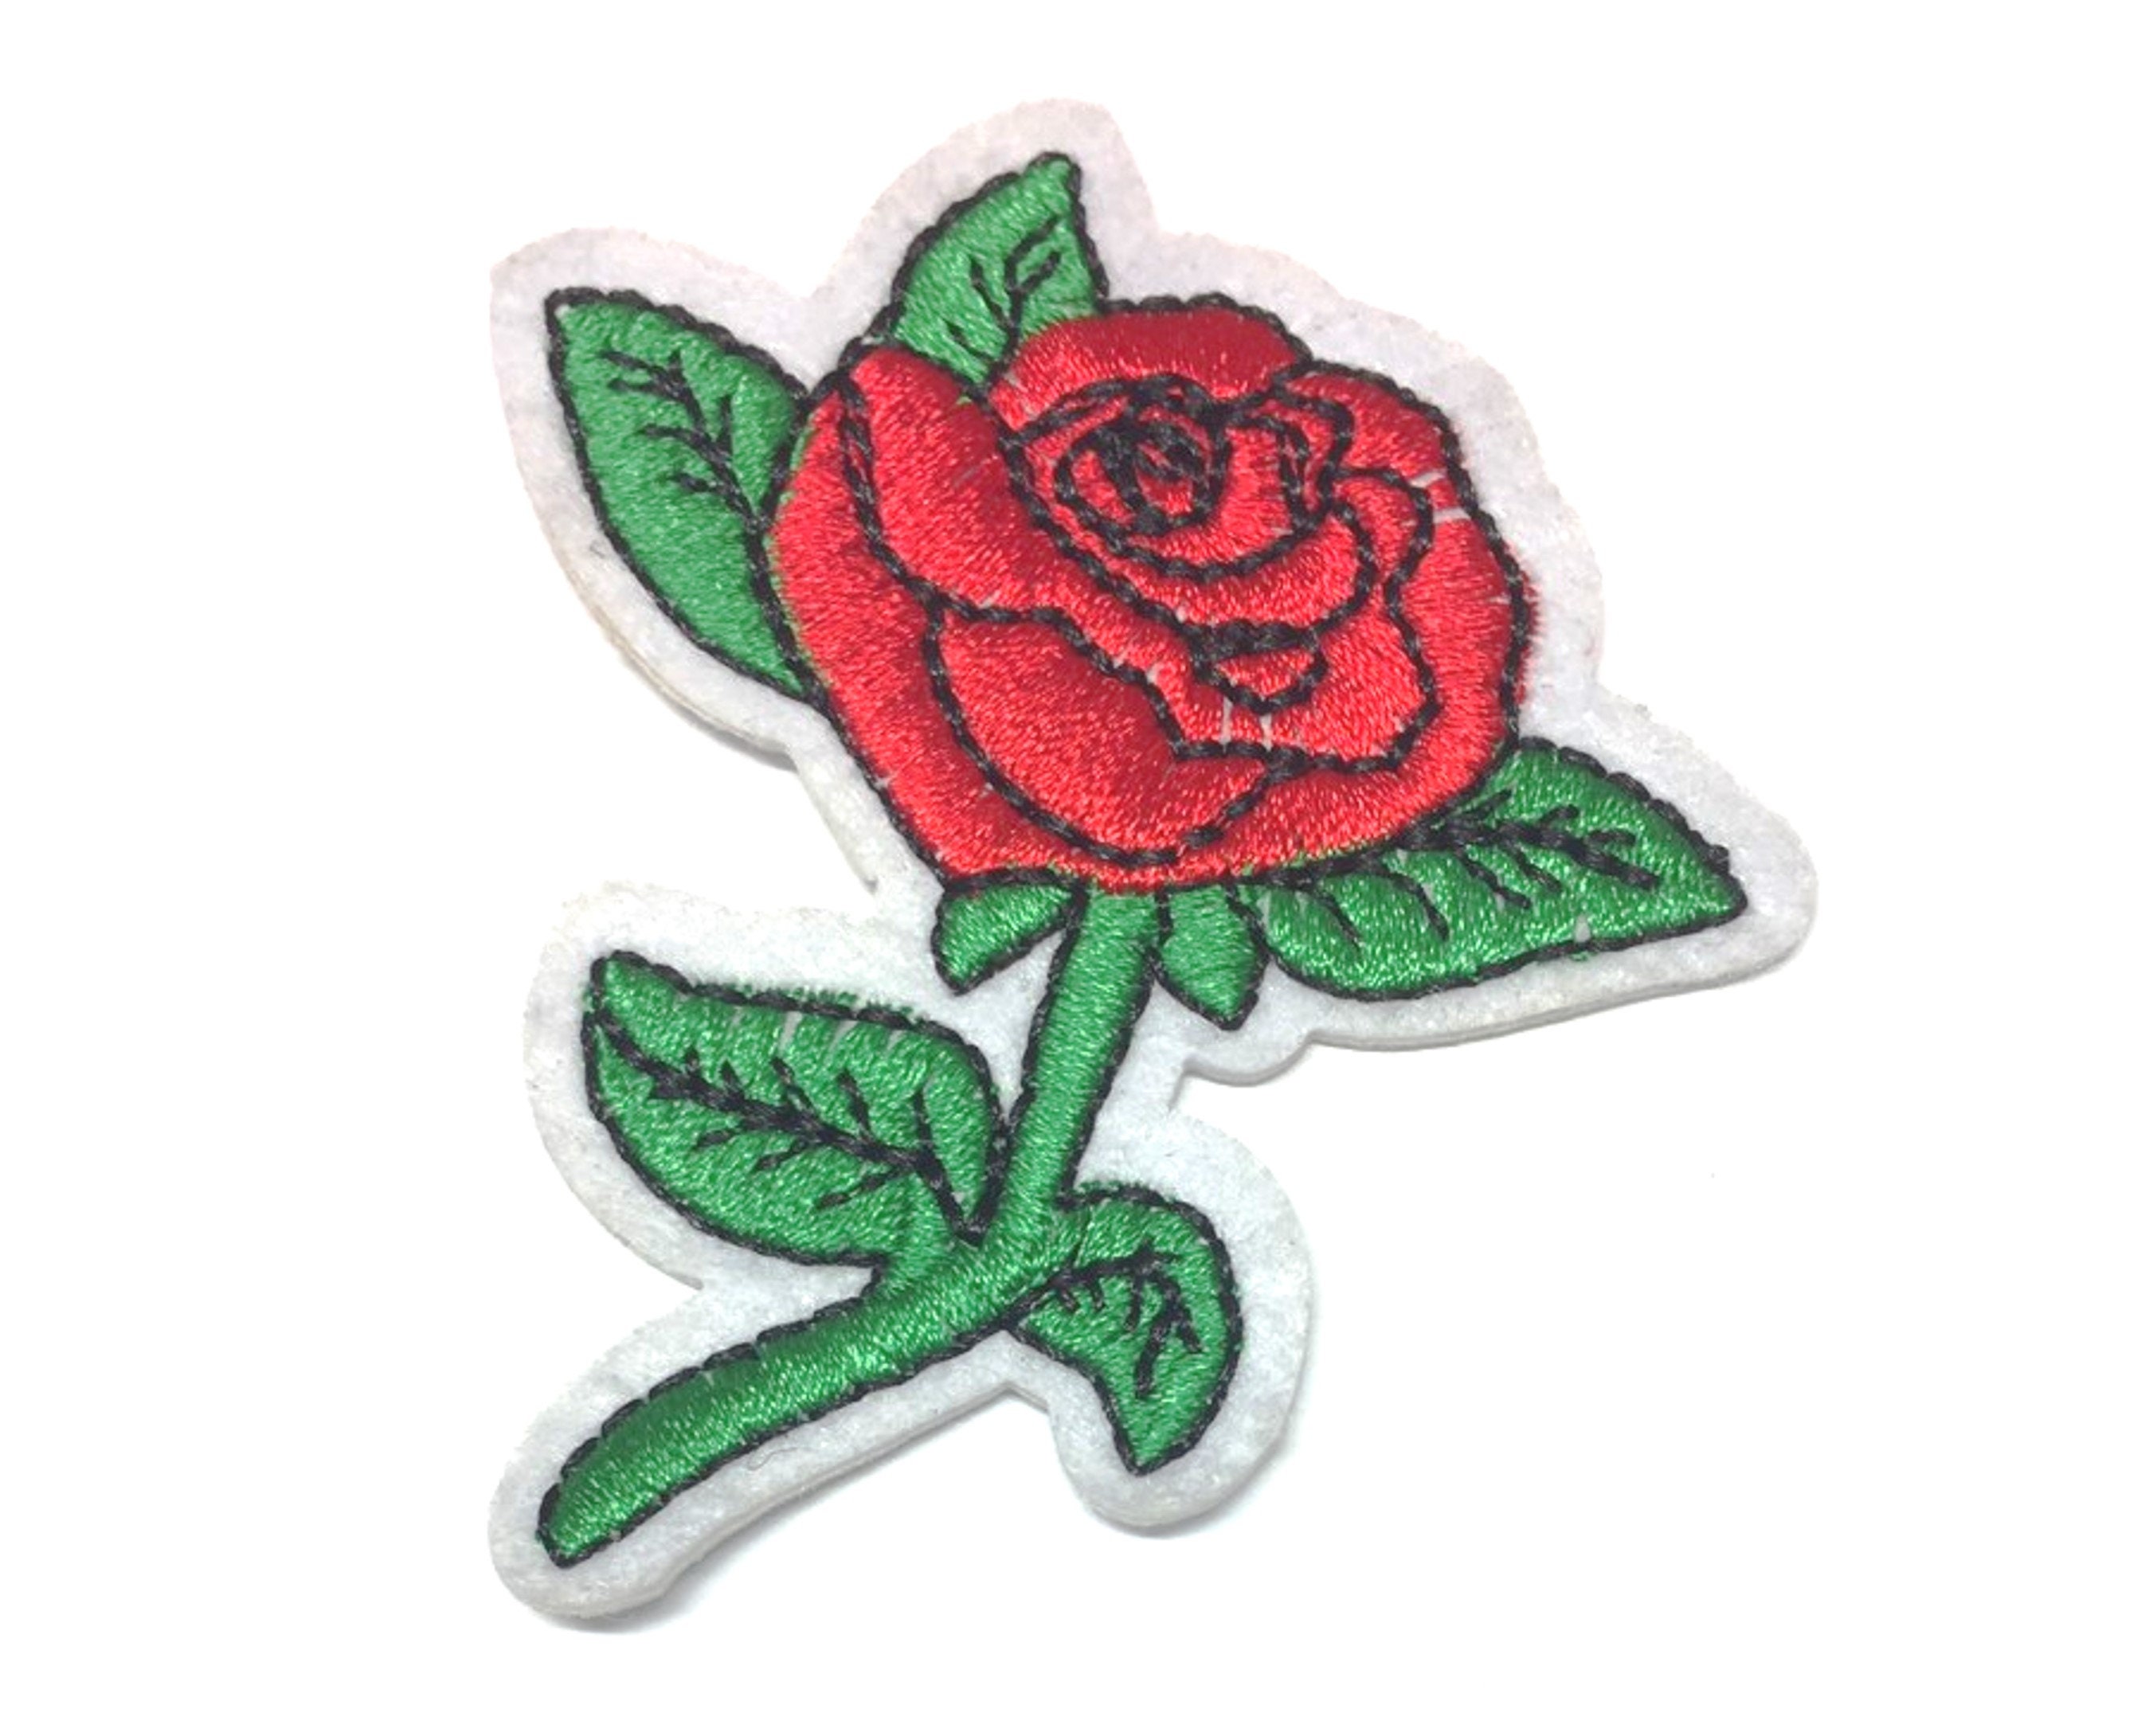 IRON ON PATCH: LANCASHIRE RED ROSE COUNTY NOVELTY BACKPACKERS FLAG SHIELD SEW